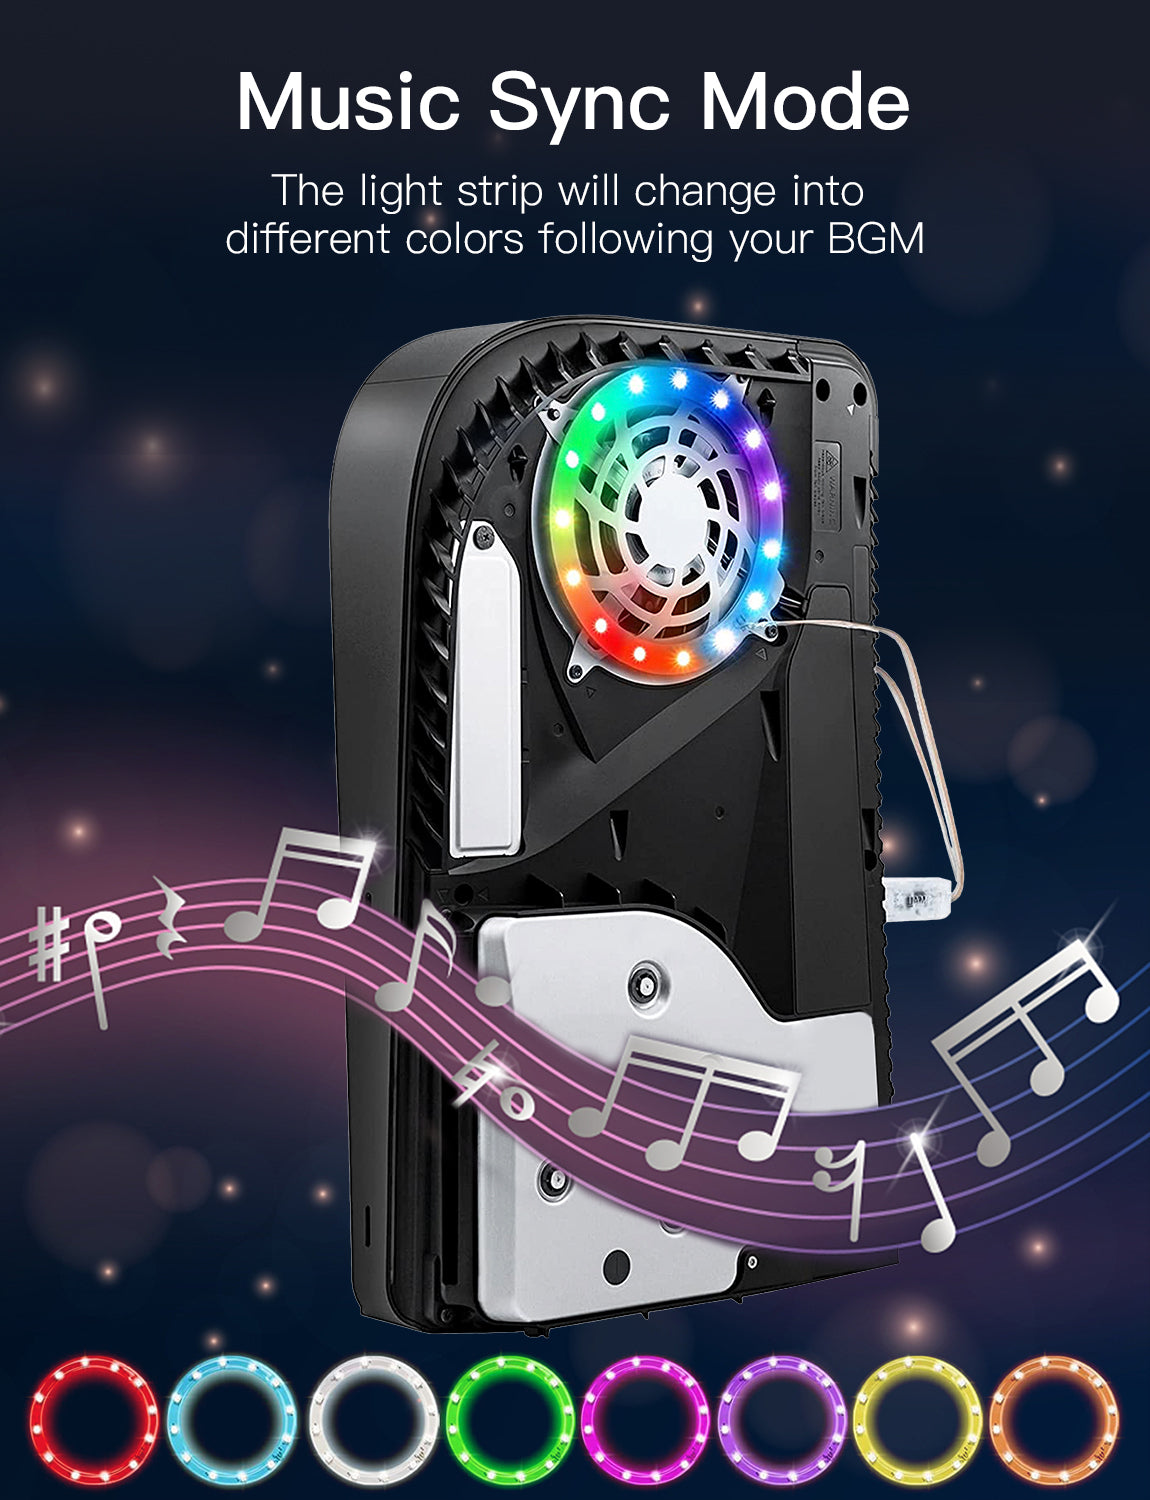 Experience dynamic color changes with the light strip synced to your BGM. 